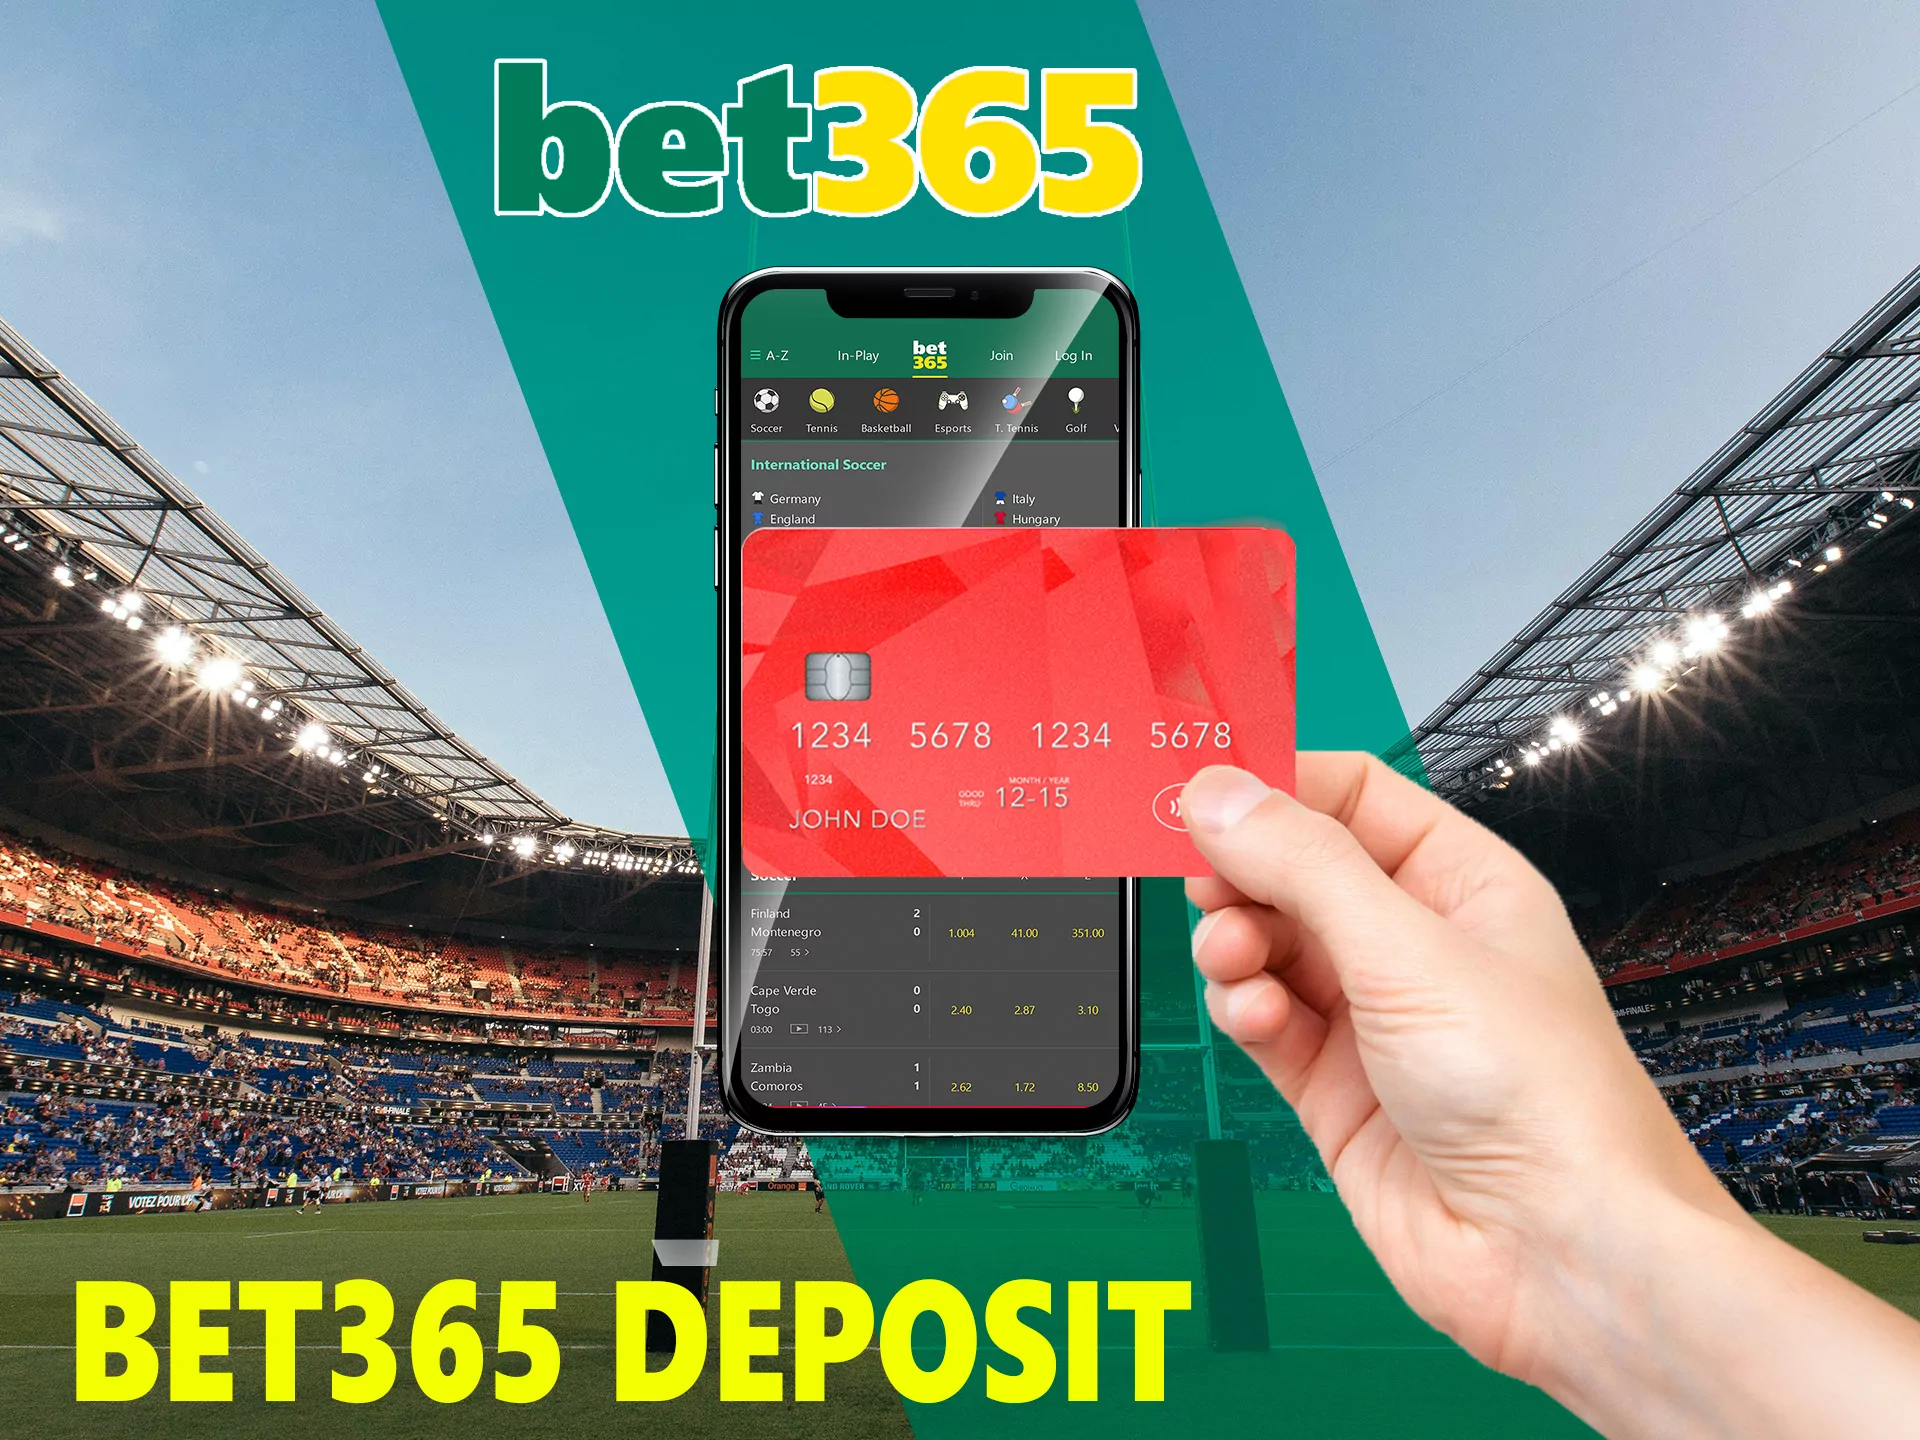 This procedure will not take long at Bet365, just follow the steps suggested in our instructions.